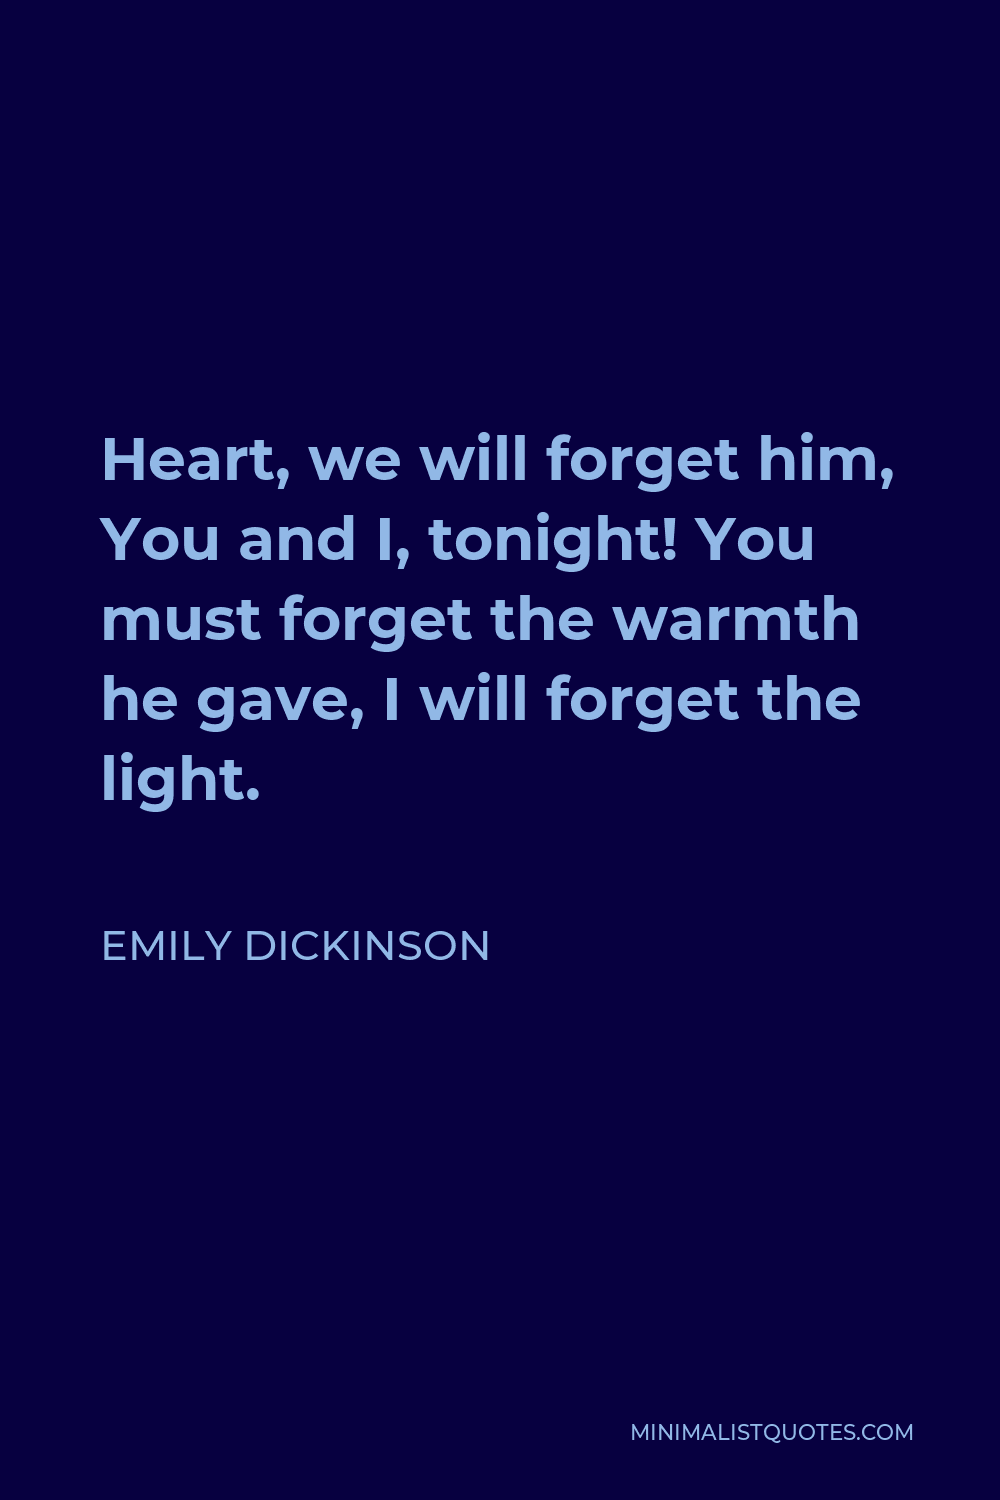 Emily Dickinson Quote - Heart, we will forget him, You and I, tonight! You must forget the warmth he gave, I will forget the light.